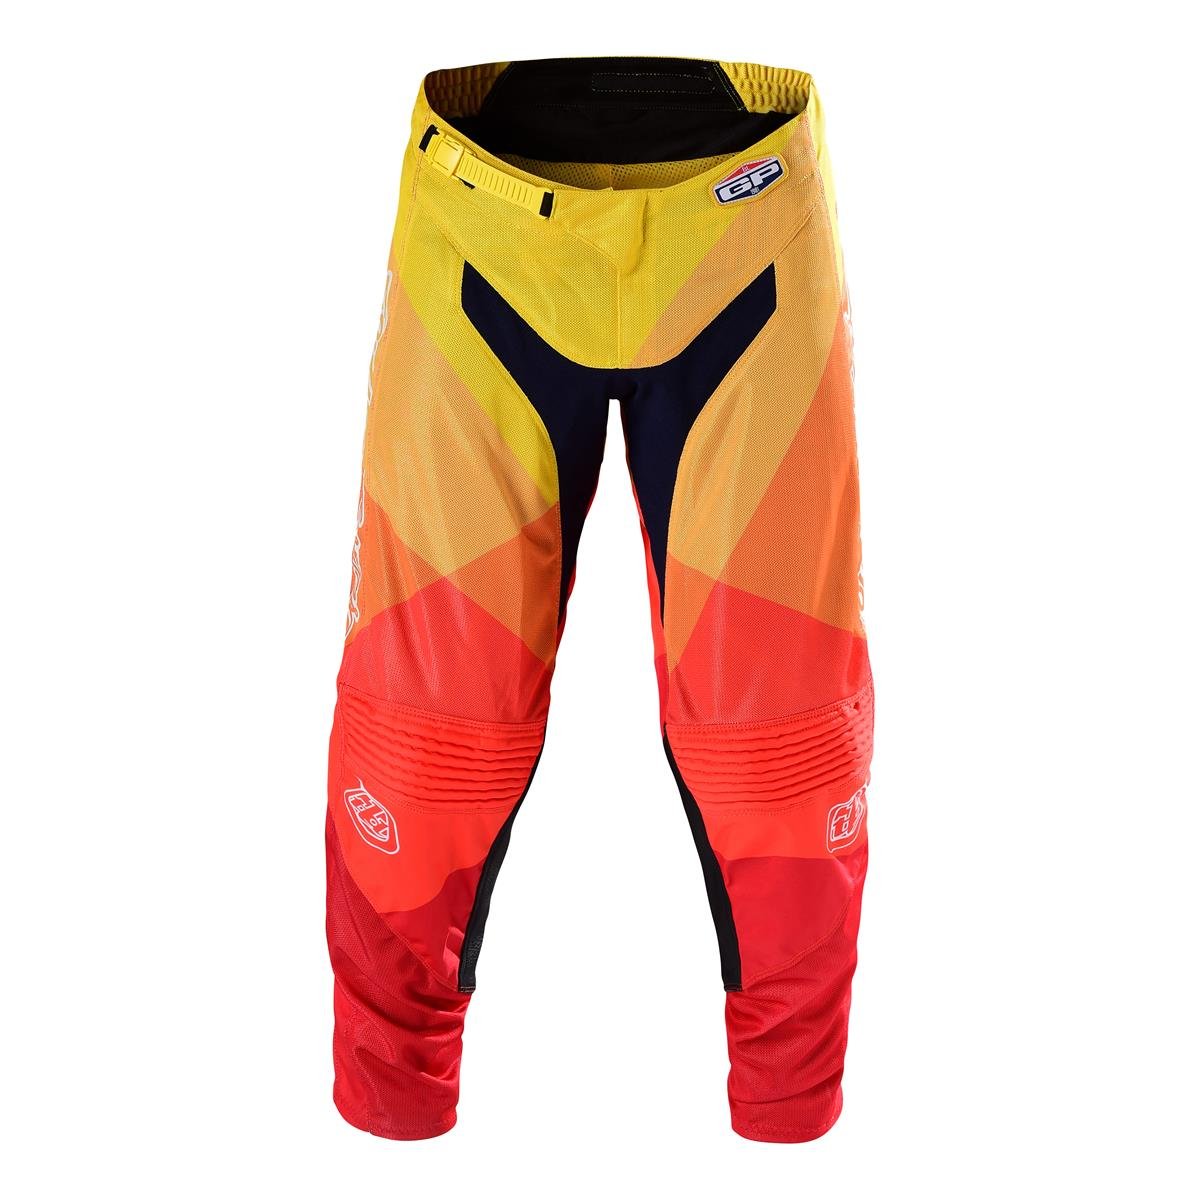 2019 Troy Lee Designs TLD GP Air MX Pant Jet Yellow/Blue Motocross Off-Road